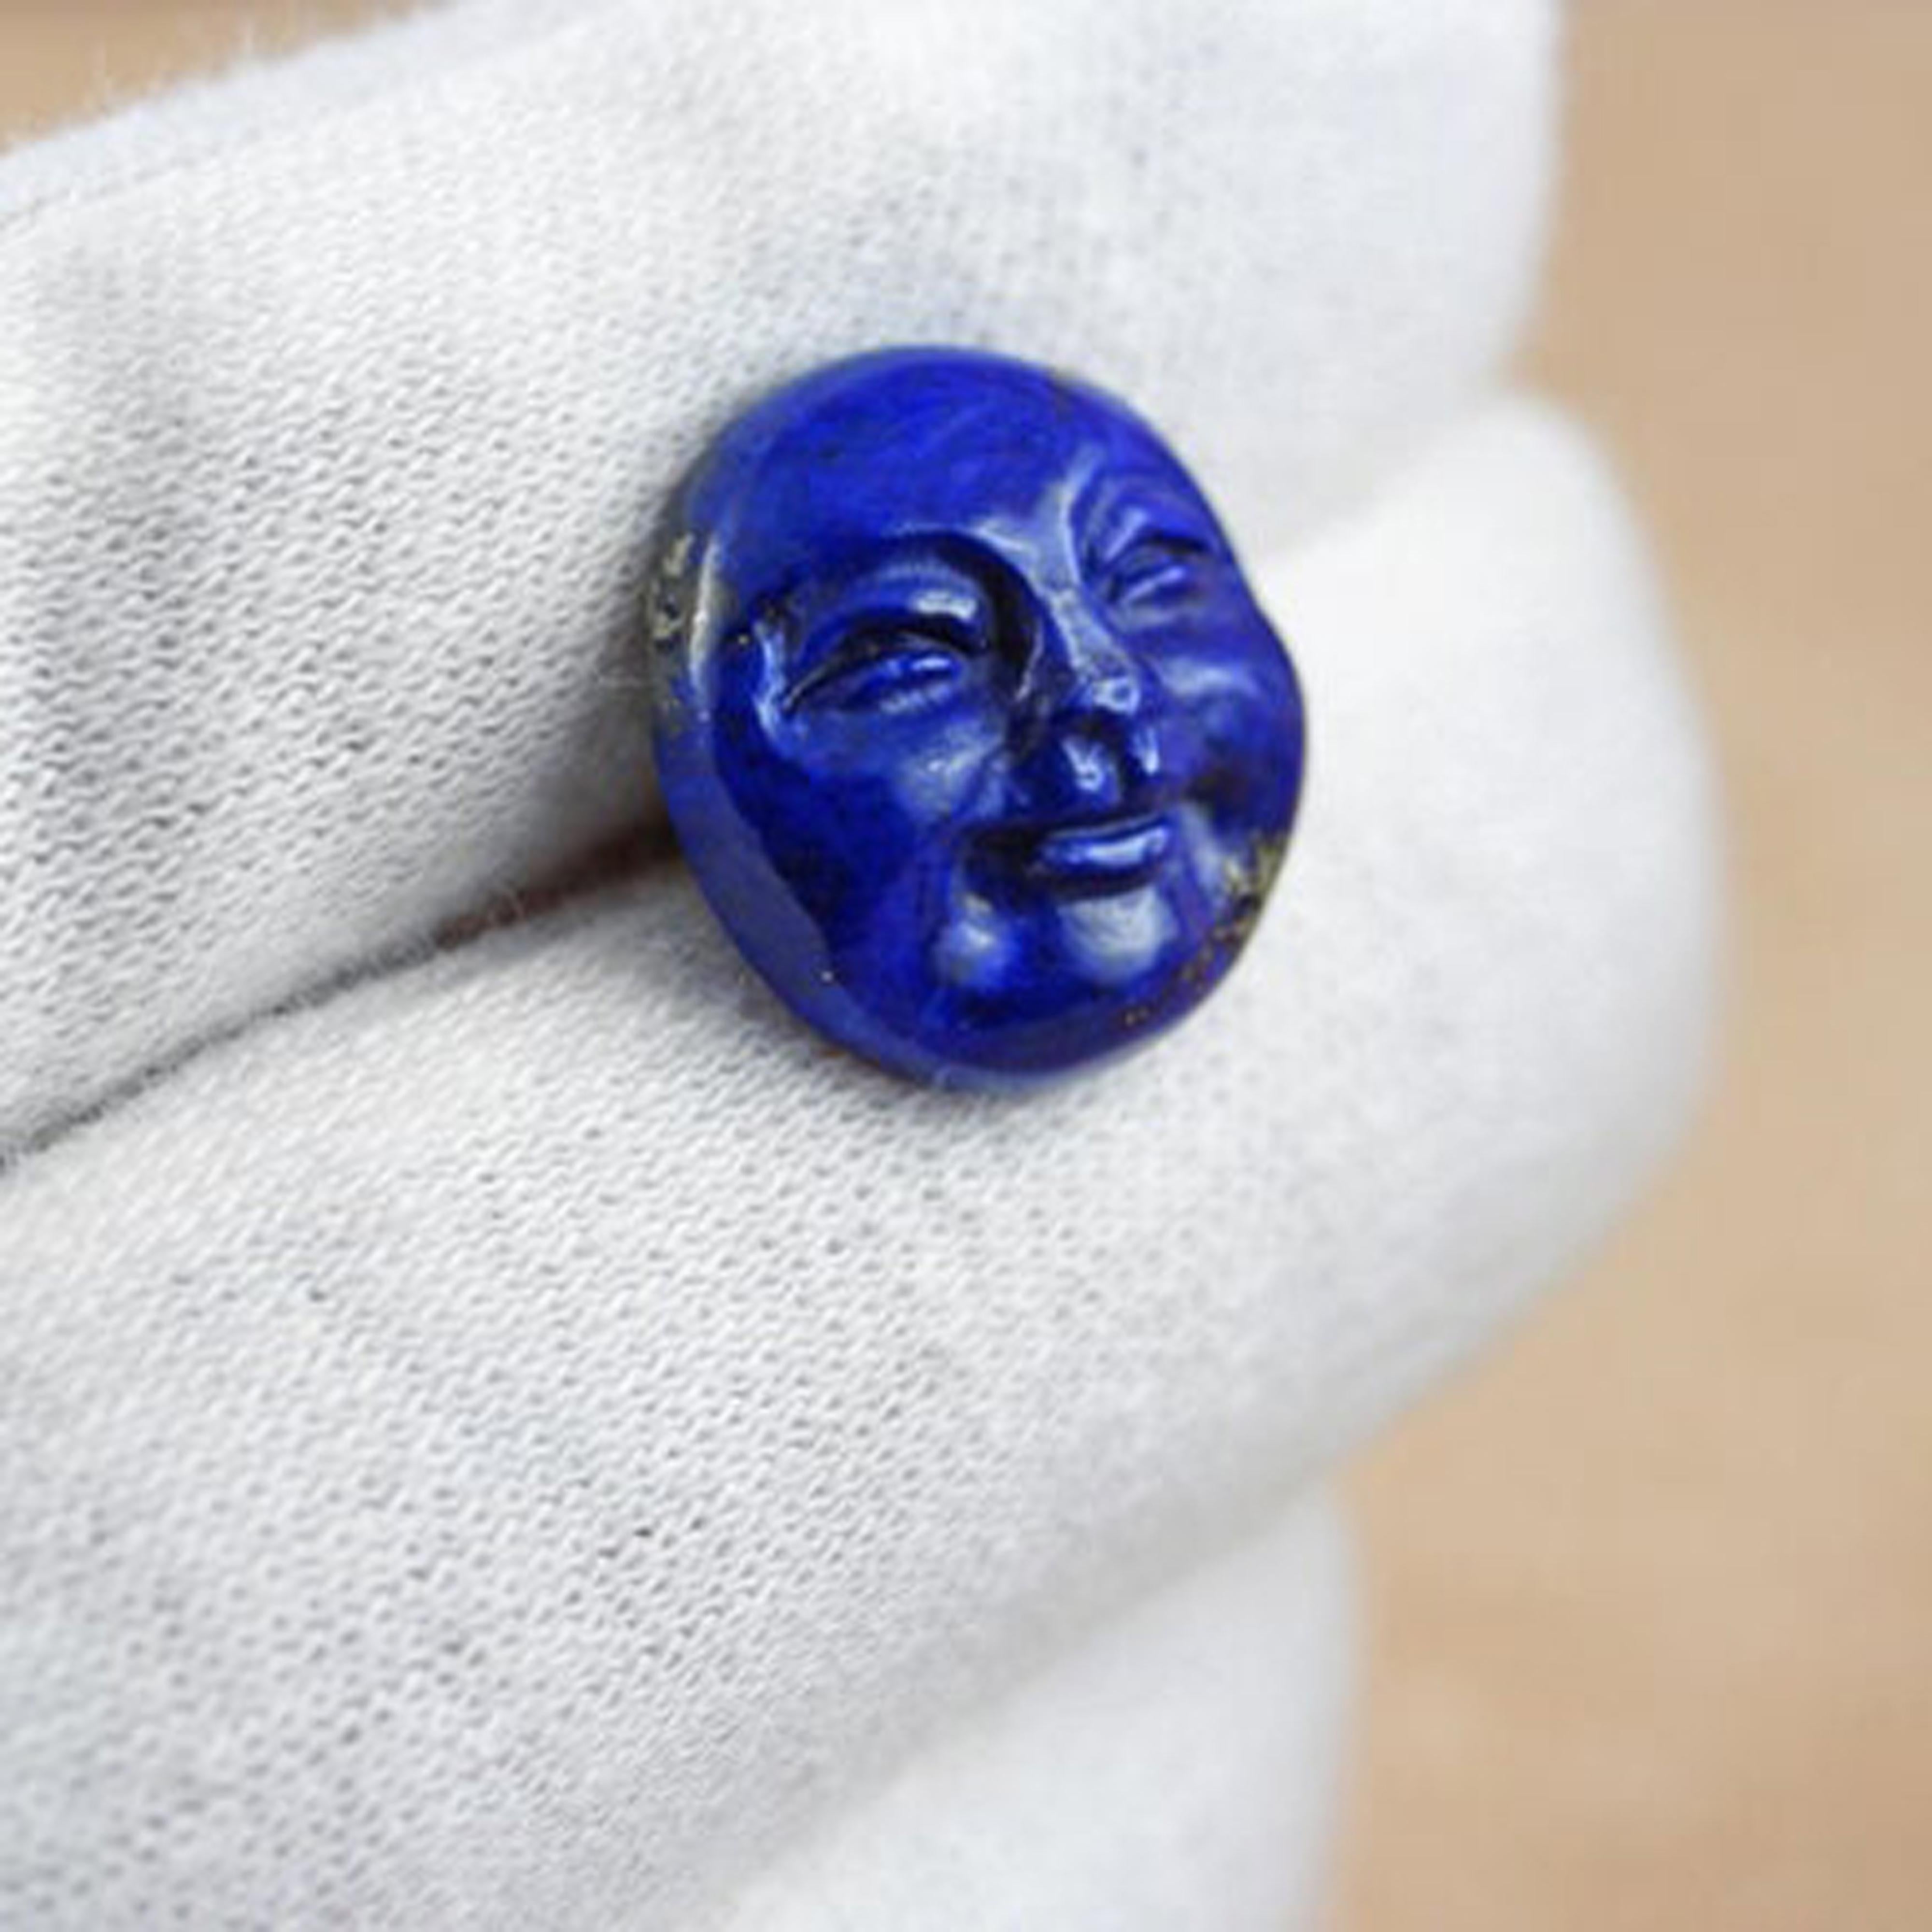 An unique and particular pair of cufflinks totally made in lapis lazuli and hand carved by master craftsmen to recreate a moon smiling face. 
This pair of cufflinks is set in 18 karat yellow gold with a chain links that connect the moon to the